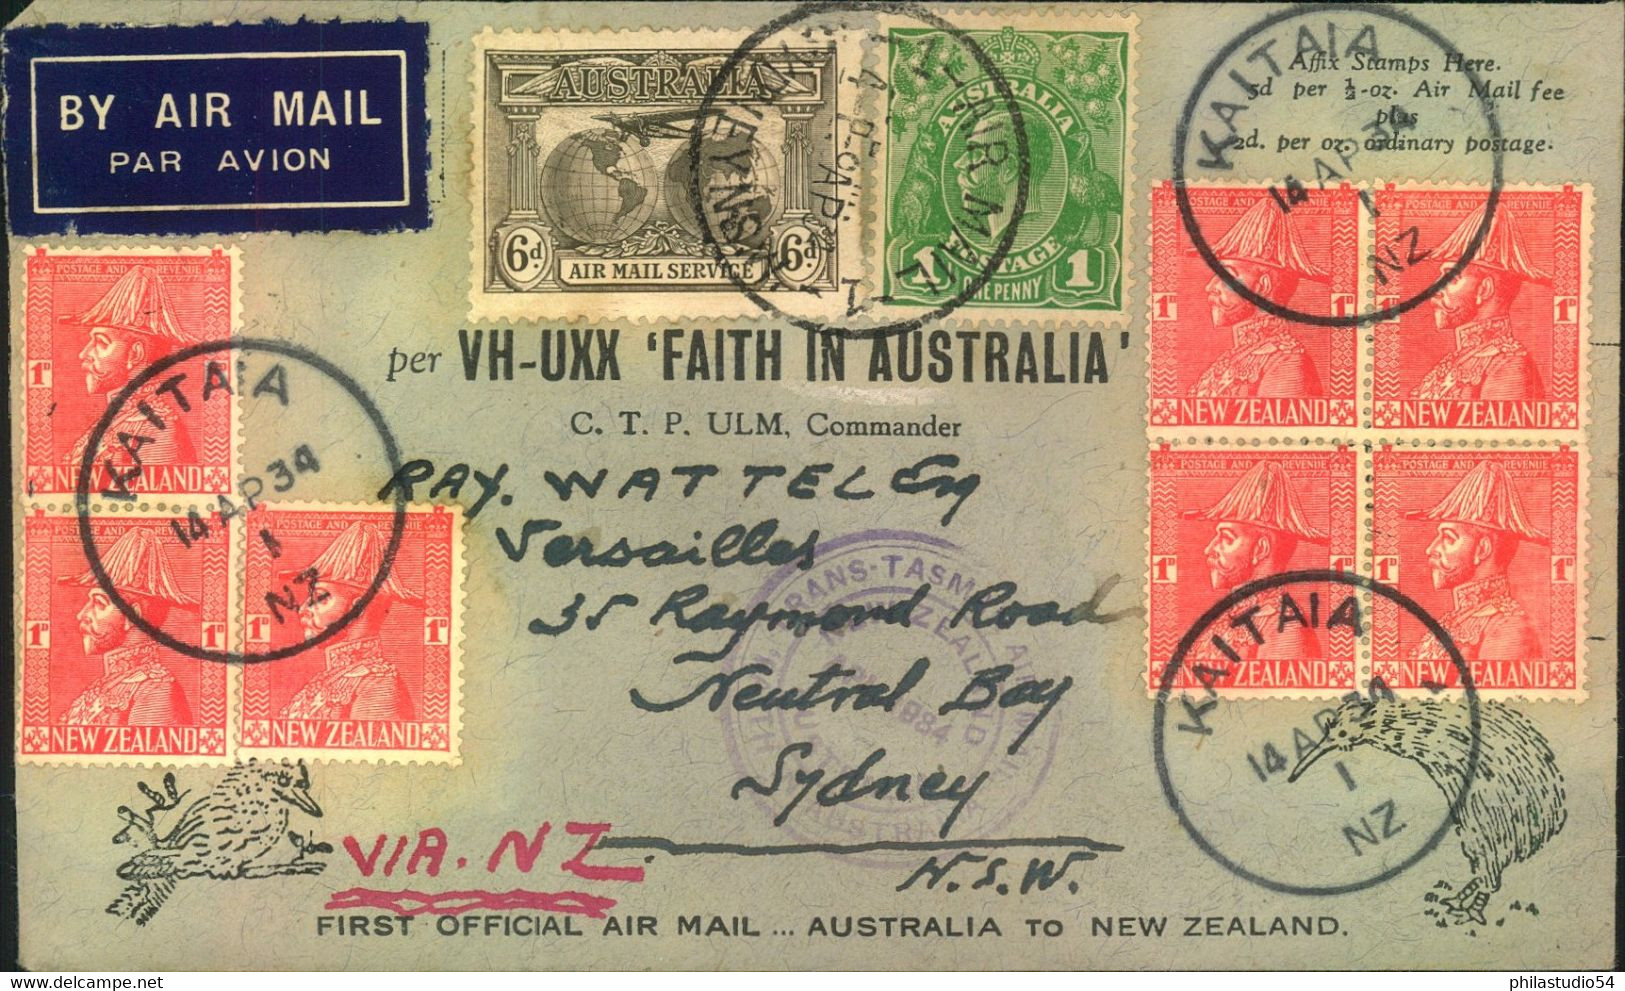 1934, Airmail Per "VH-UKK "FAITH IN AUSTRALIA" From Sydney With Arrival AUCKLAND. Back With New Zealand Franking From KA - Briefe U. Dokumente